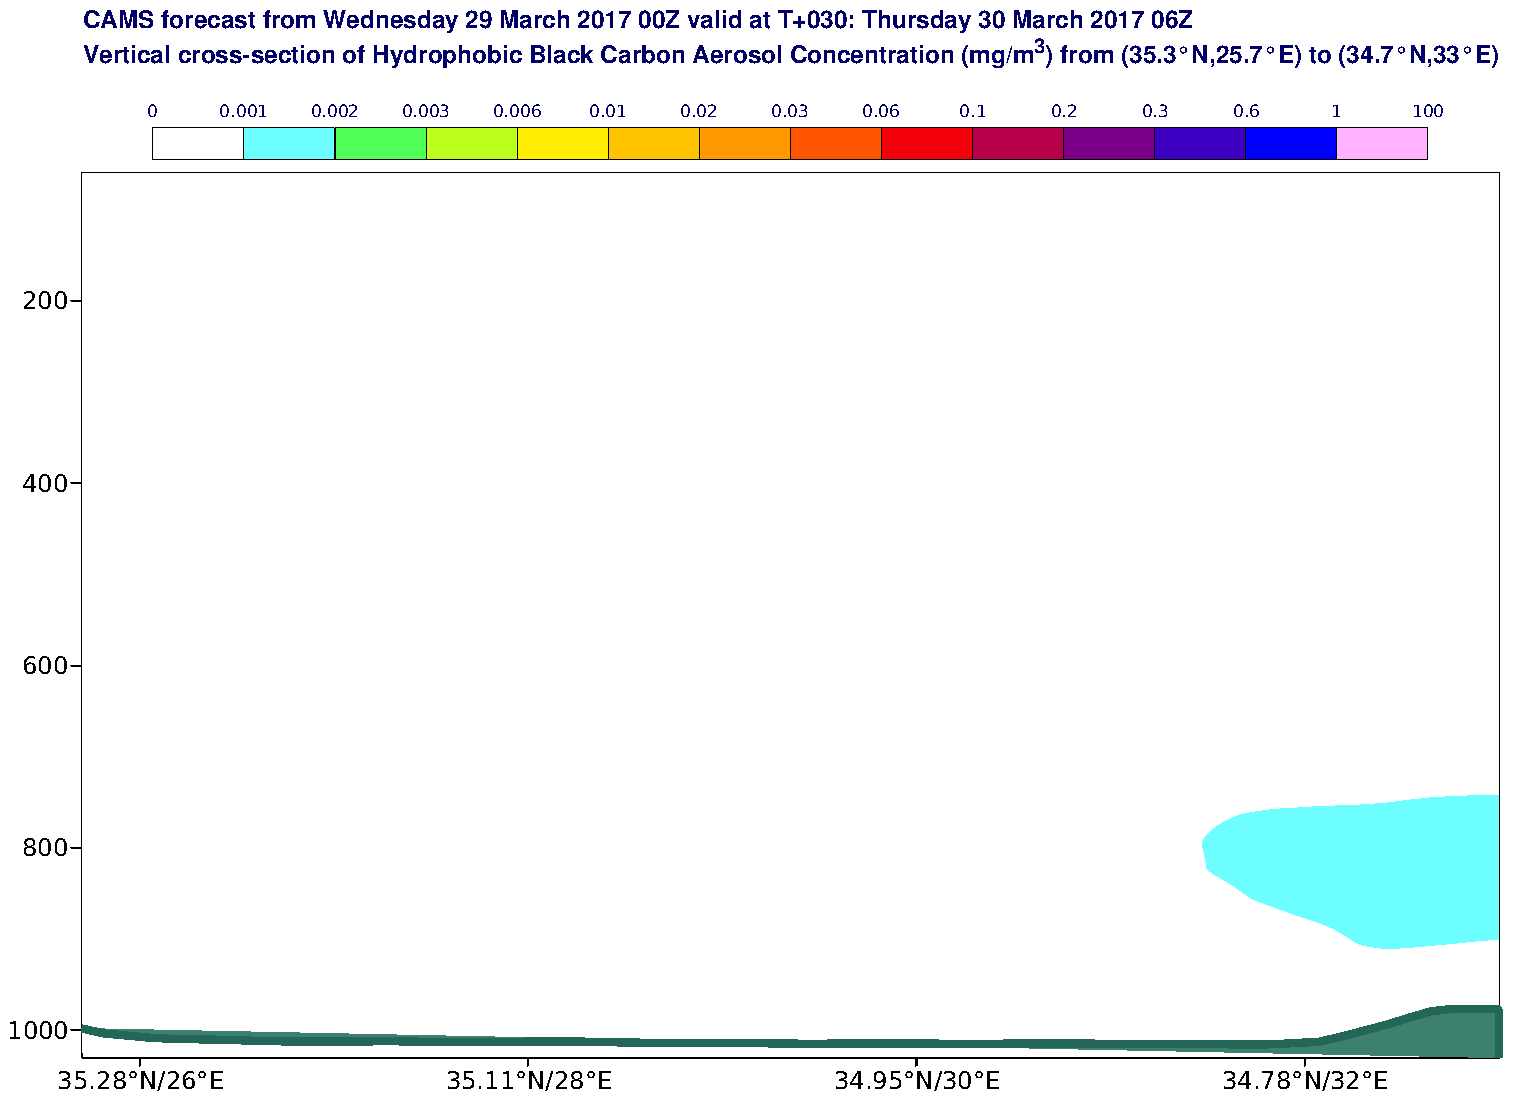 Vertical cross-section of Hydrophobic Black Carbon Aerosol Concentration (mg/m3) valid at T30 - 2017-03-30 06:00